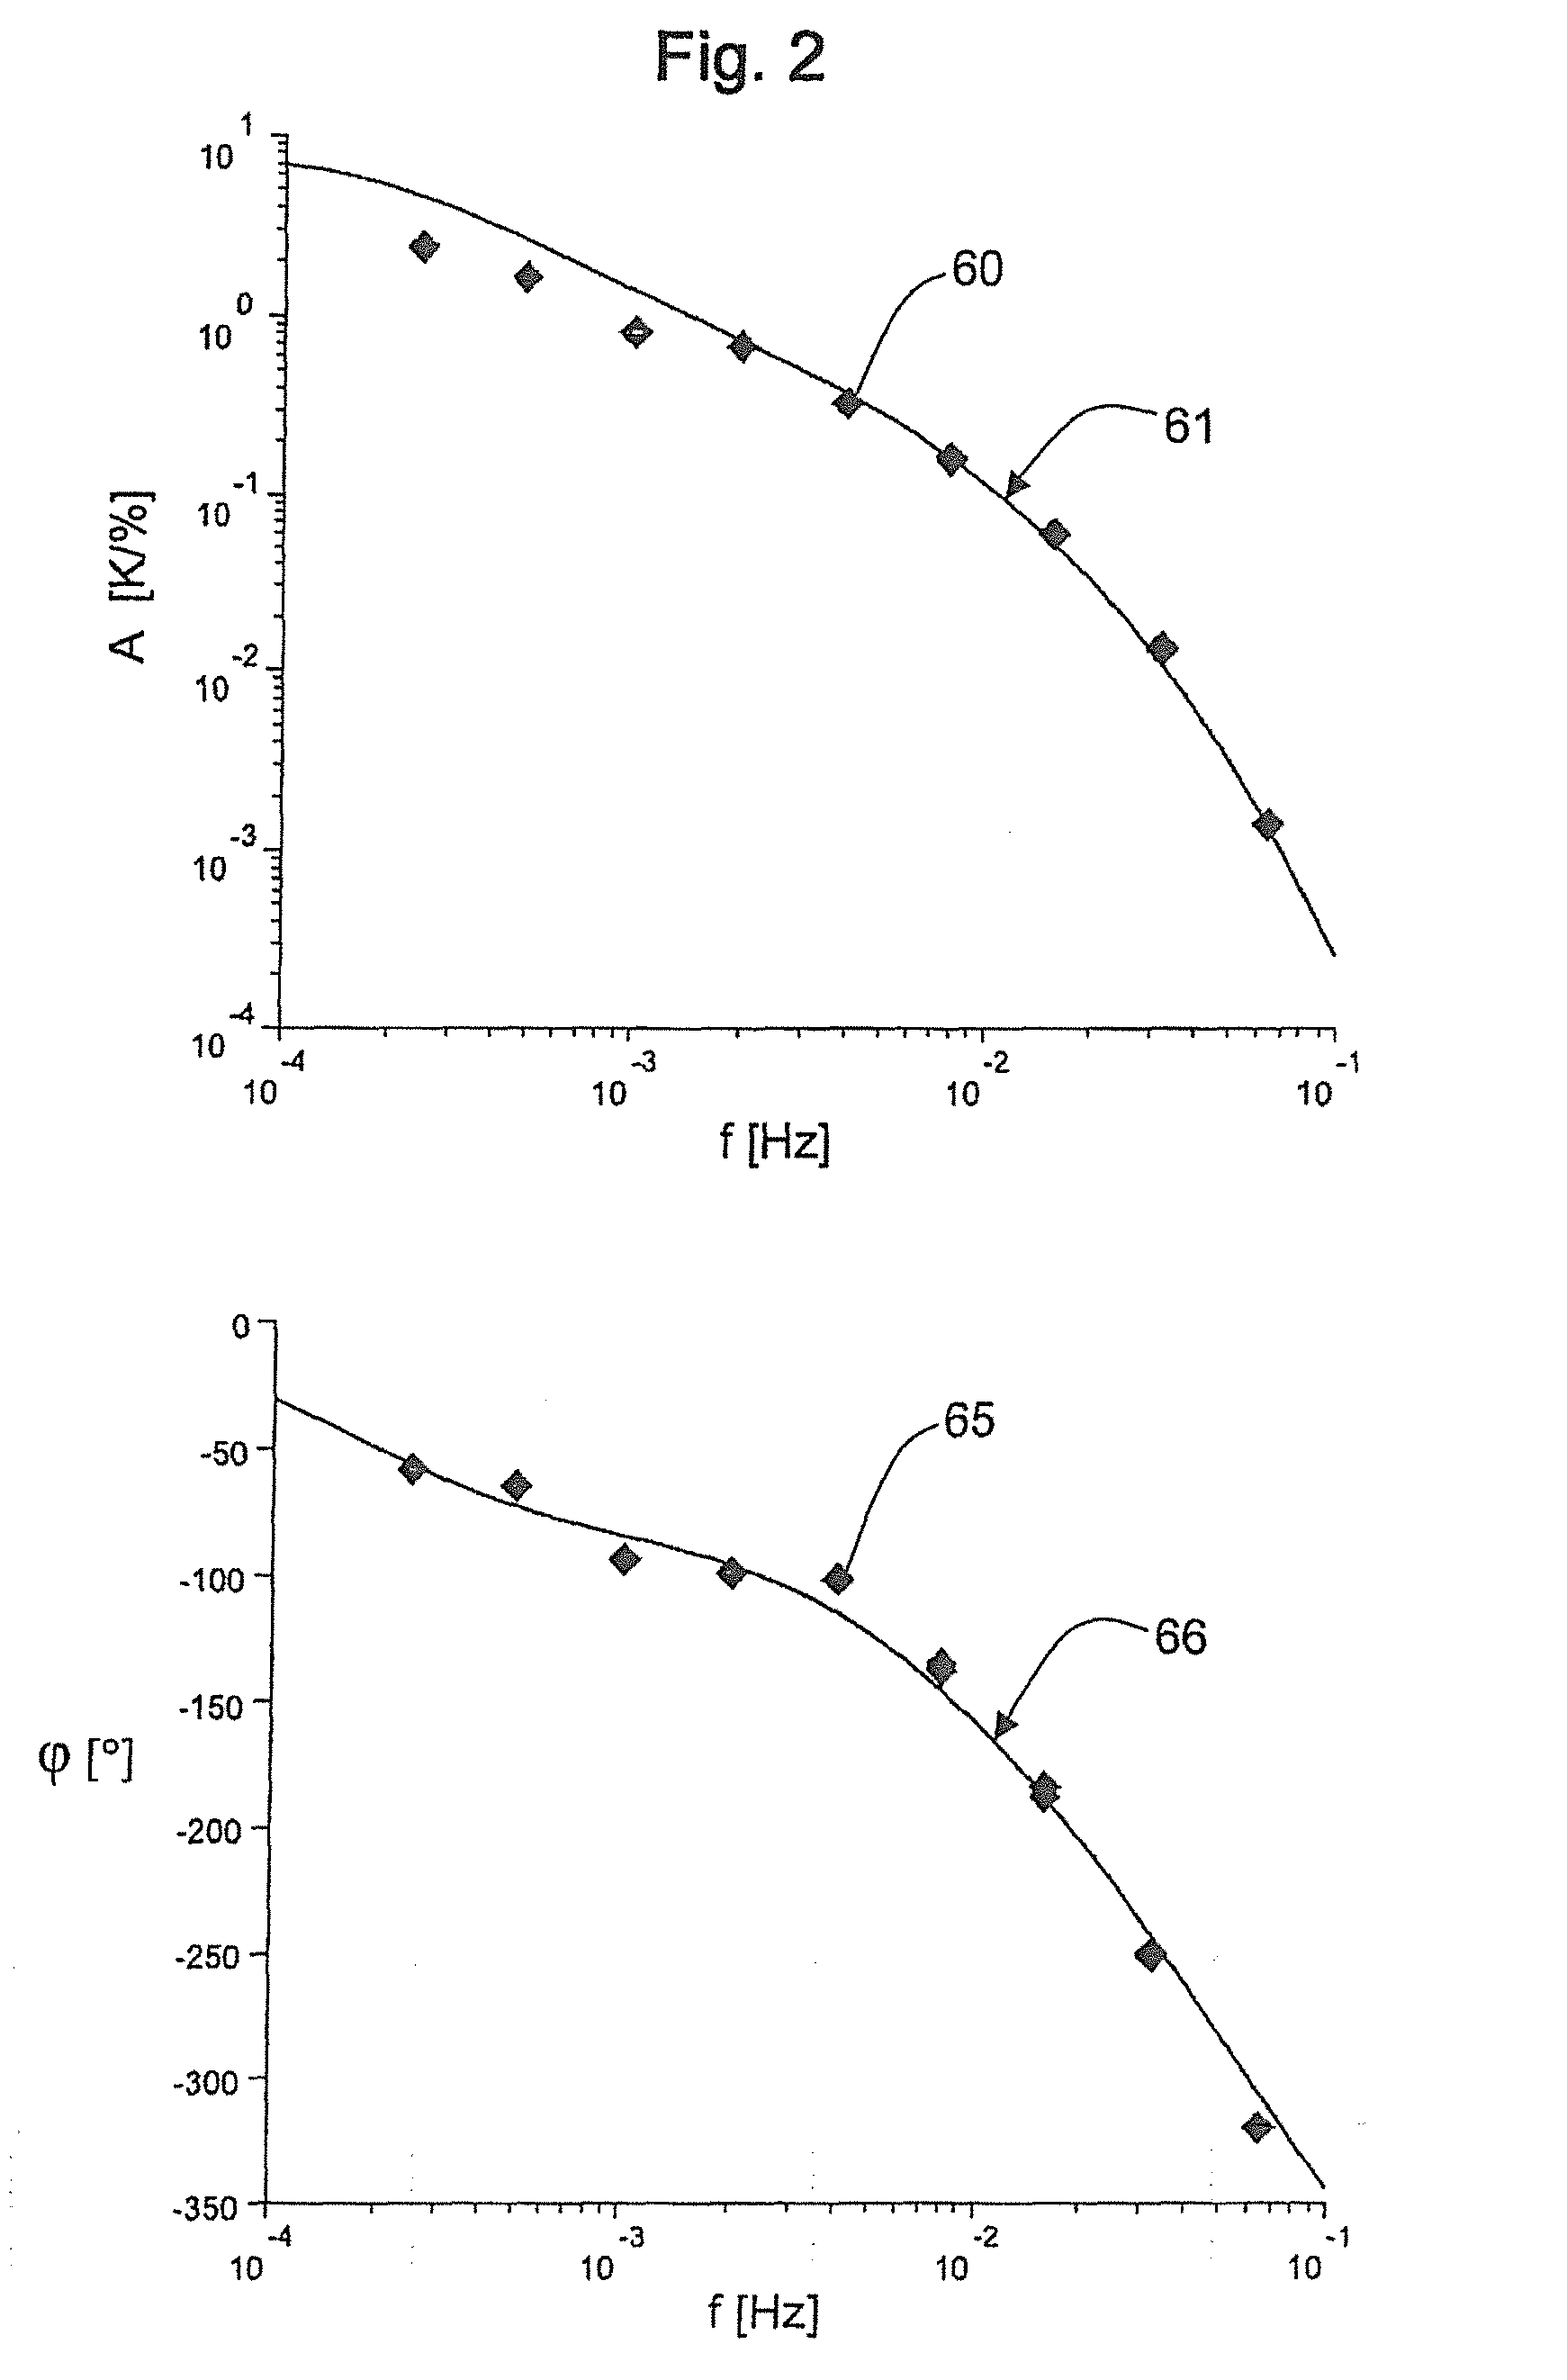 Method and apparatus for controlling the temperature of a calibration volume of a device for comparative calibration of temperature sensors